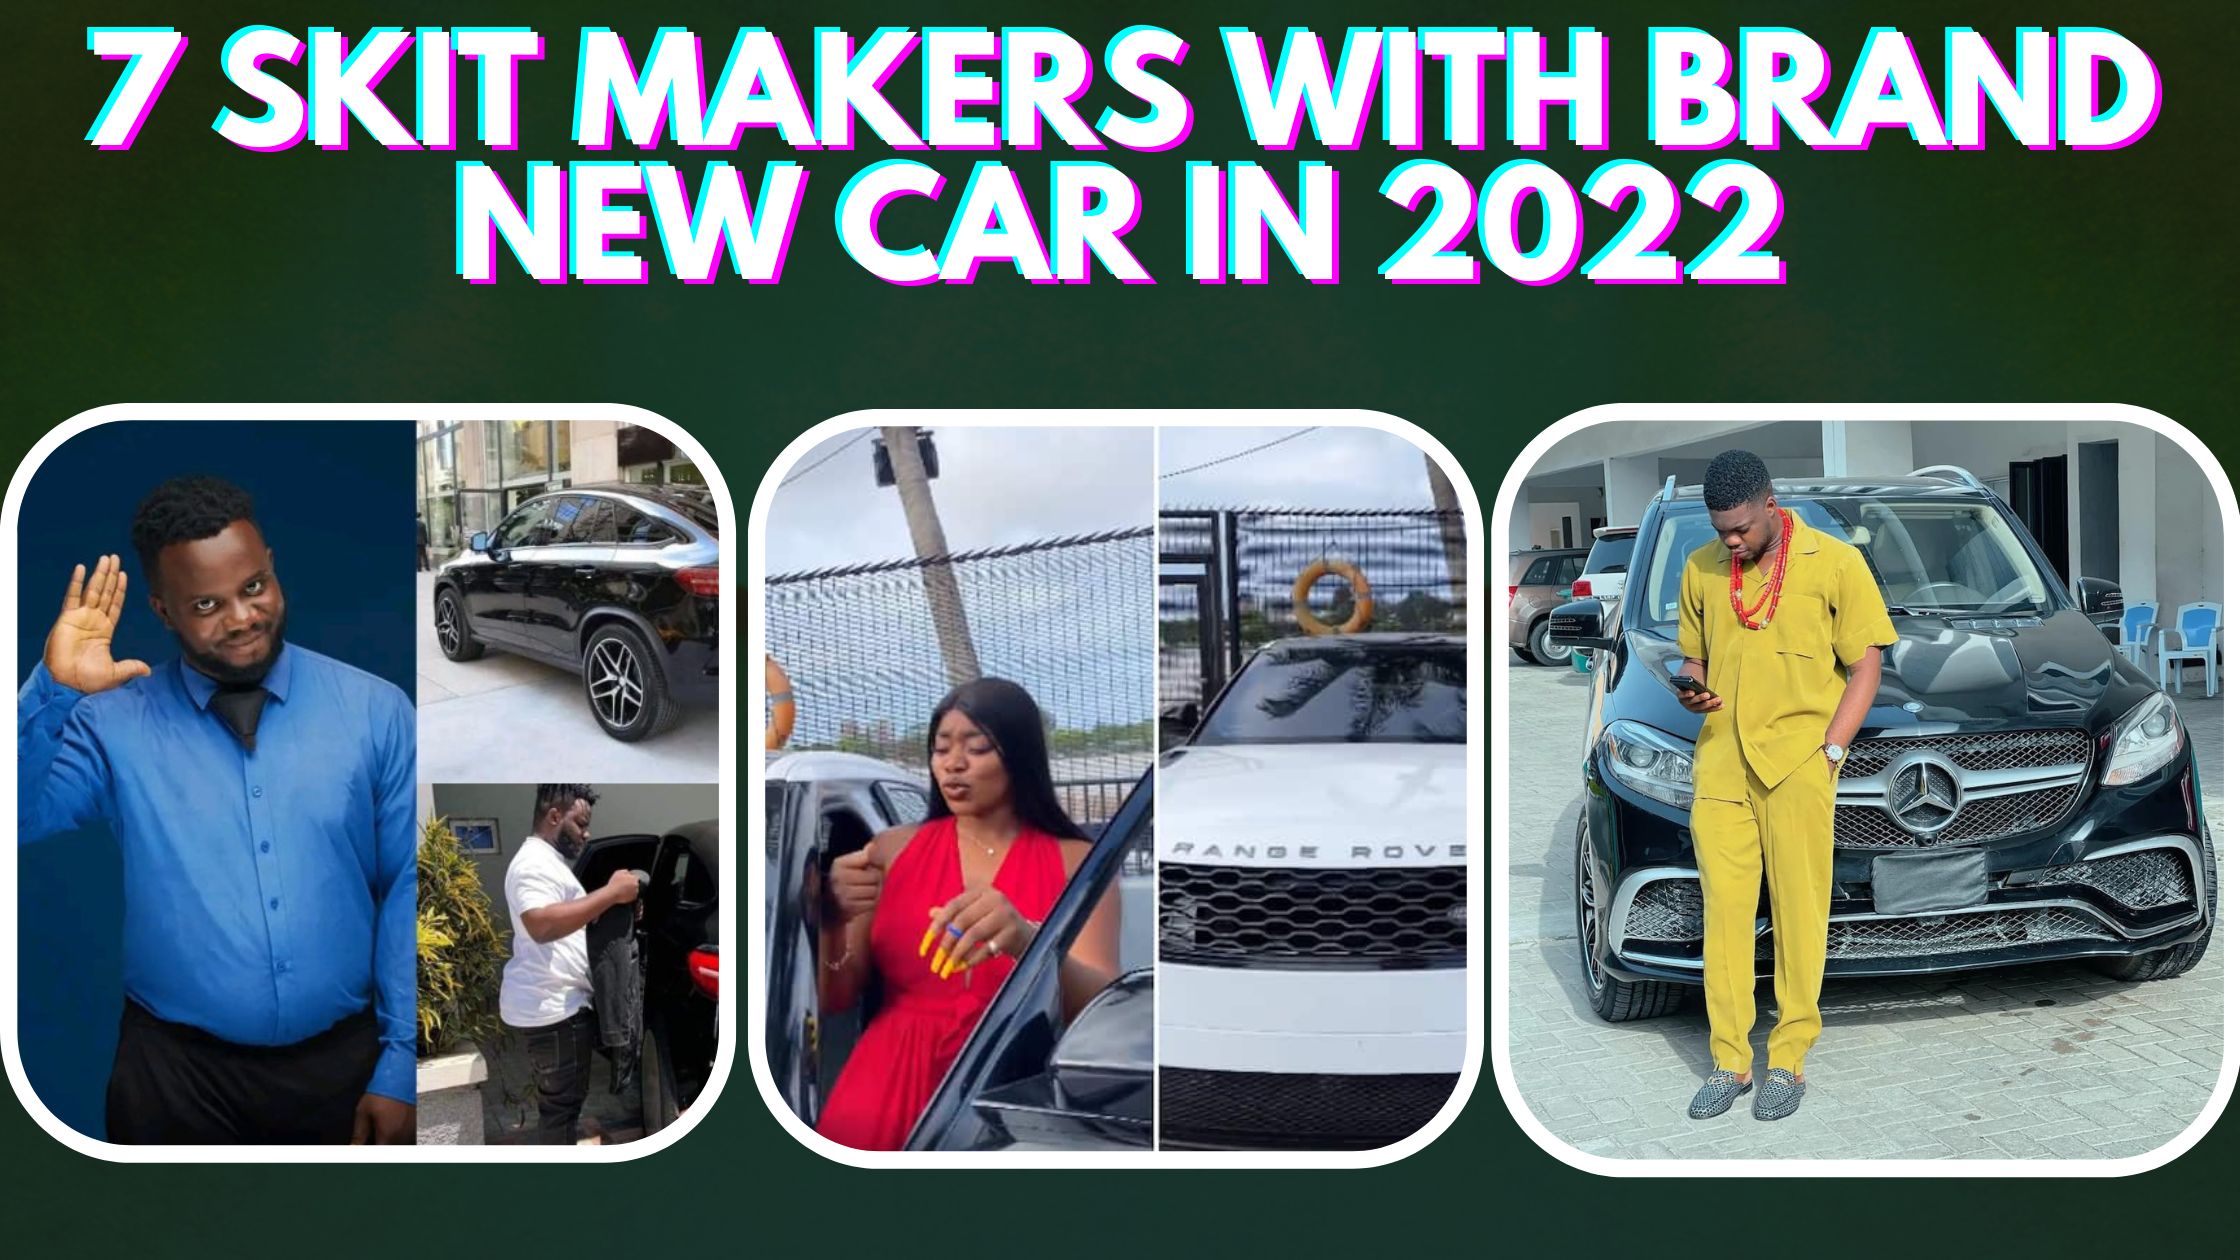 7 skit makers with brand new car in 2022